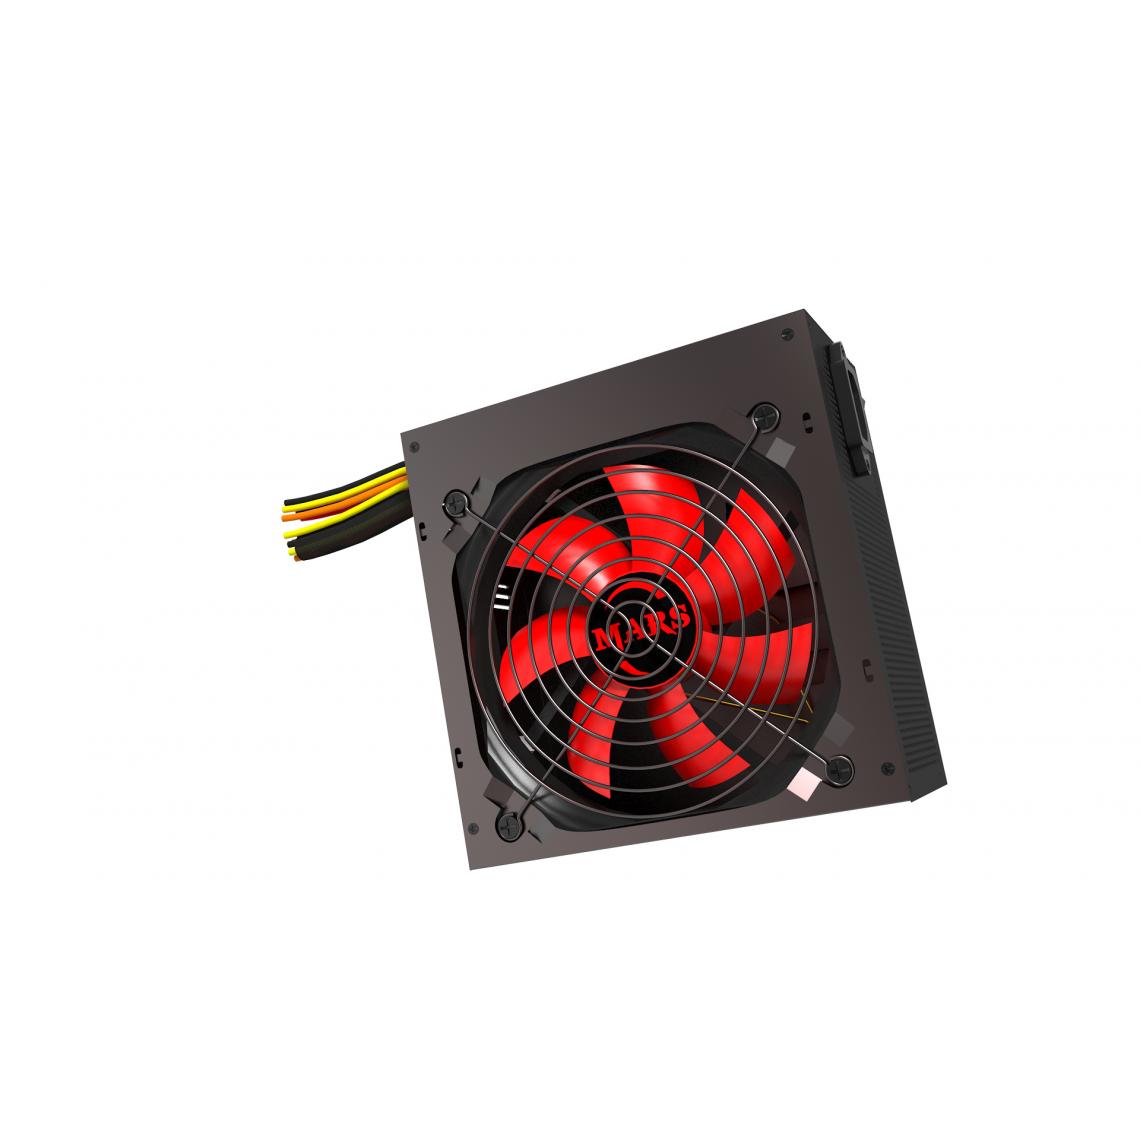 Mars Gaming - Alimentation ATX MPII 550W (Noir/Rouge) - Alimentation modulaire